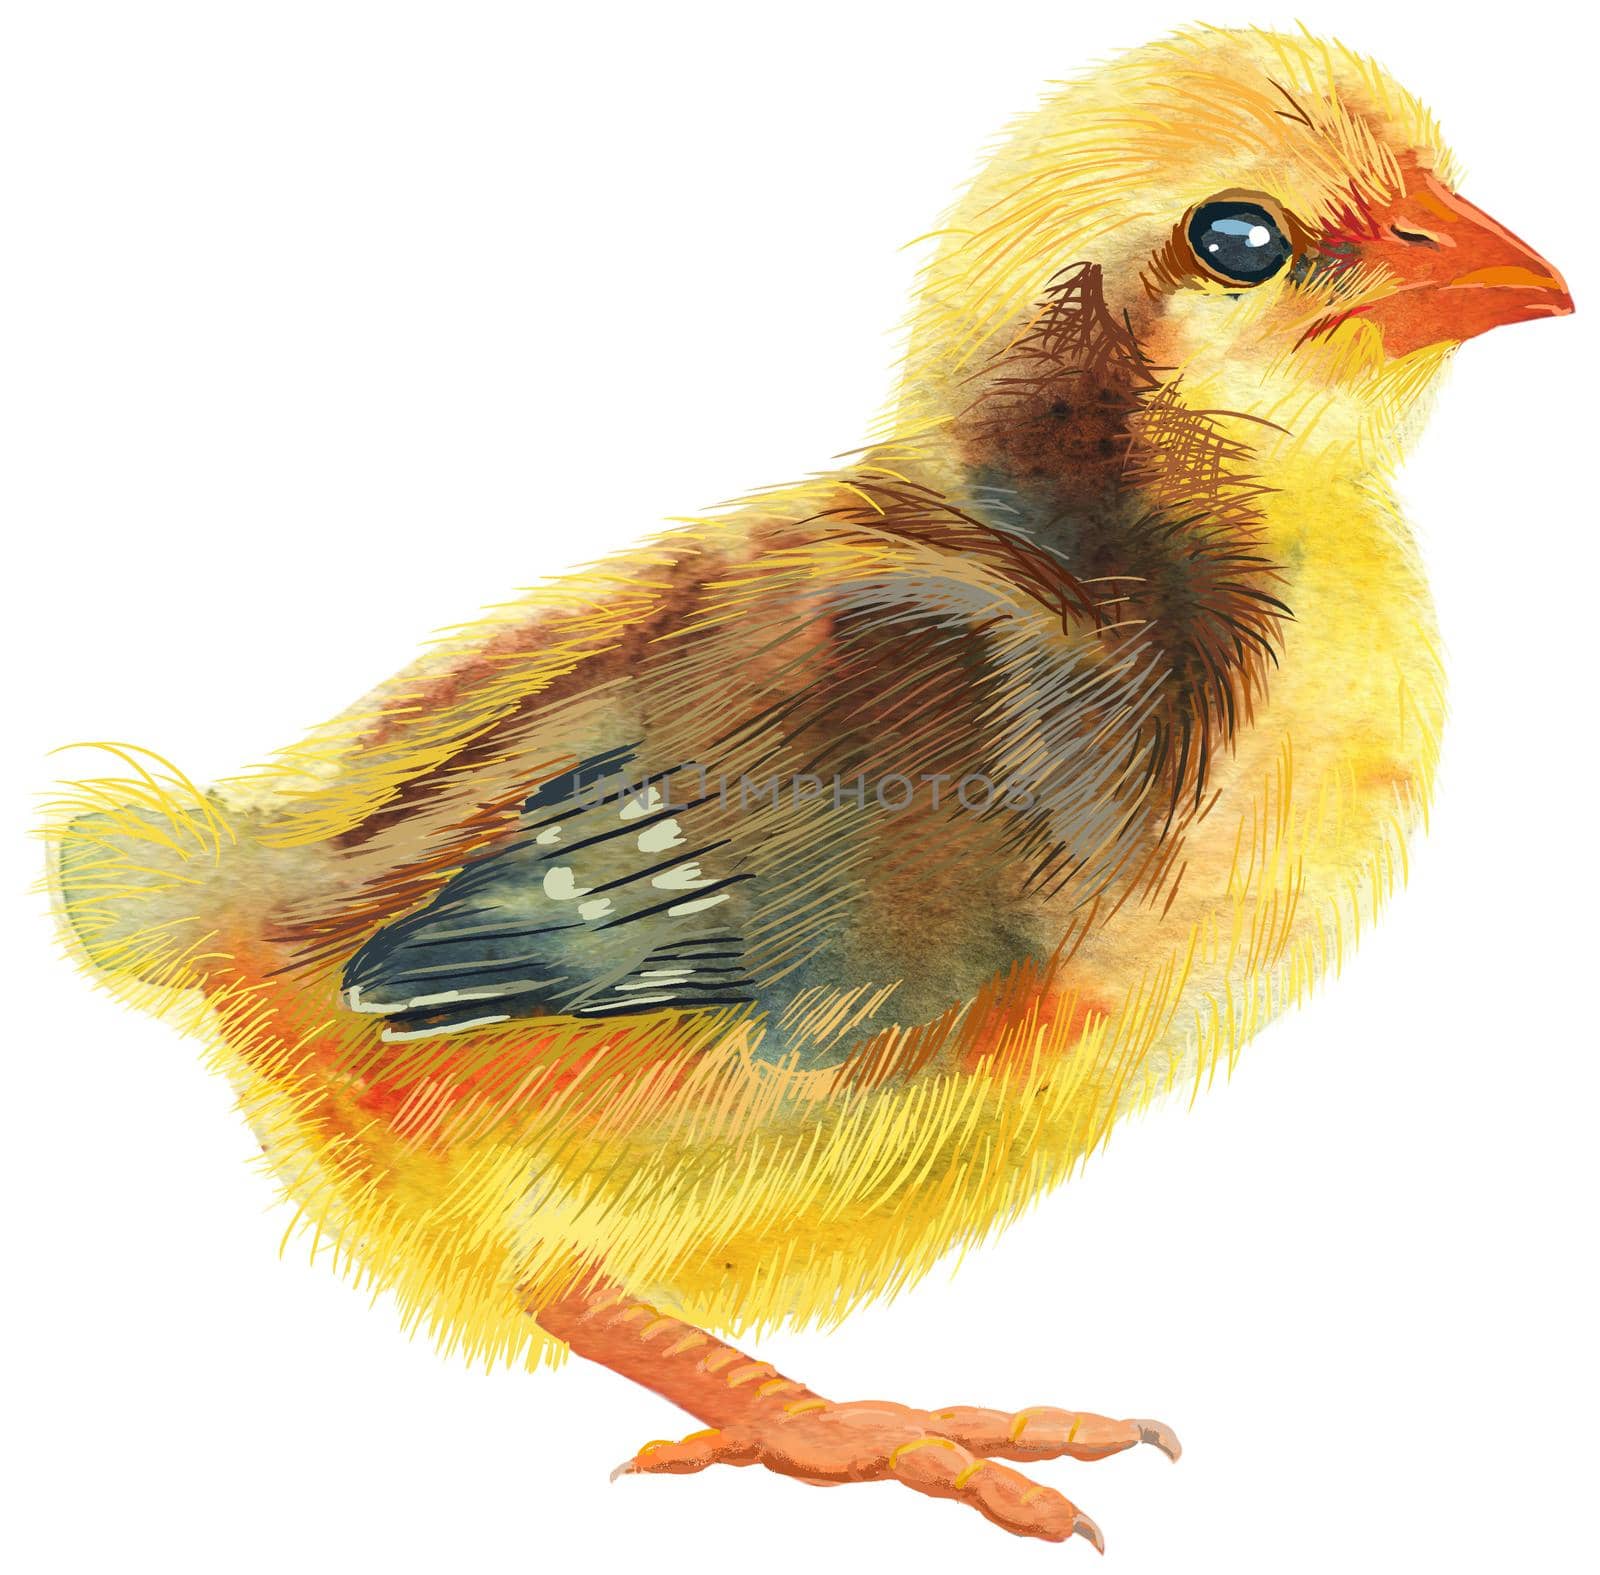 Watercolor illustration of yellow chicken with brown spots by NataOmsk